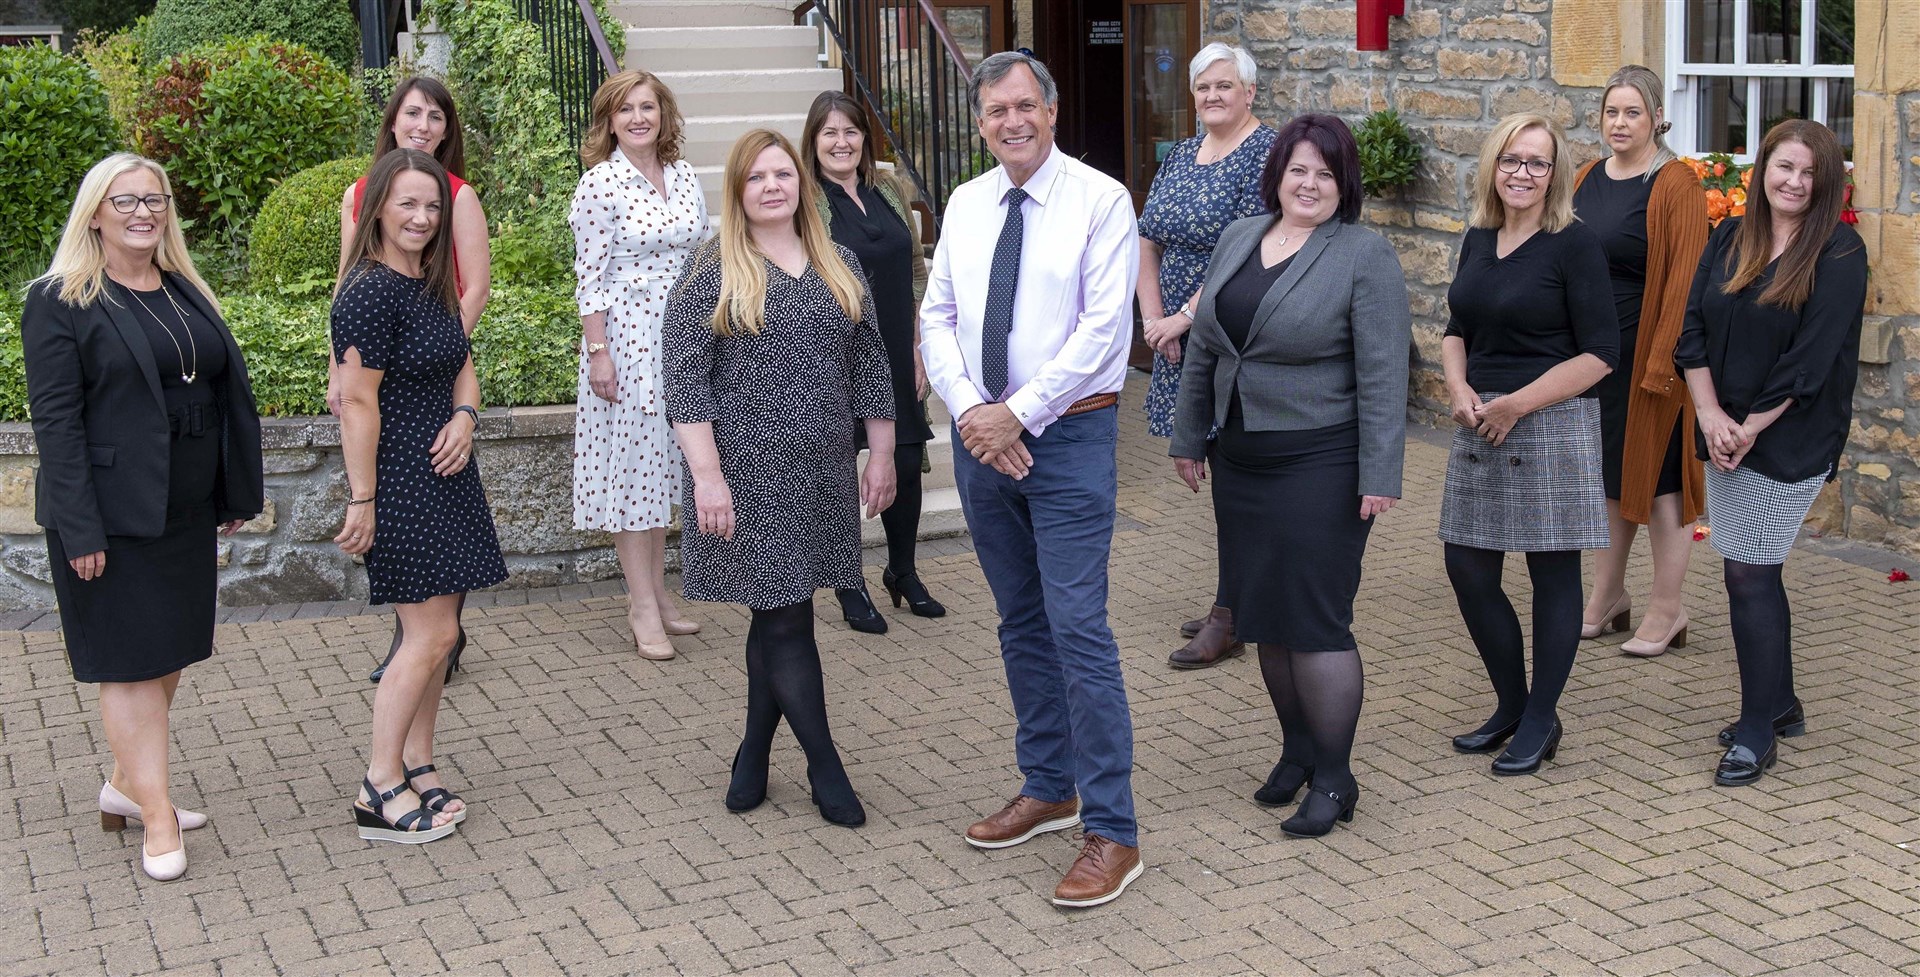 Parklands boss Ron Taylor and Grantown headquarters staff are hoping to rercuit more nurses with the cash incentive to join their award-winning company. Photo: Trevor Martin